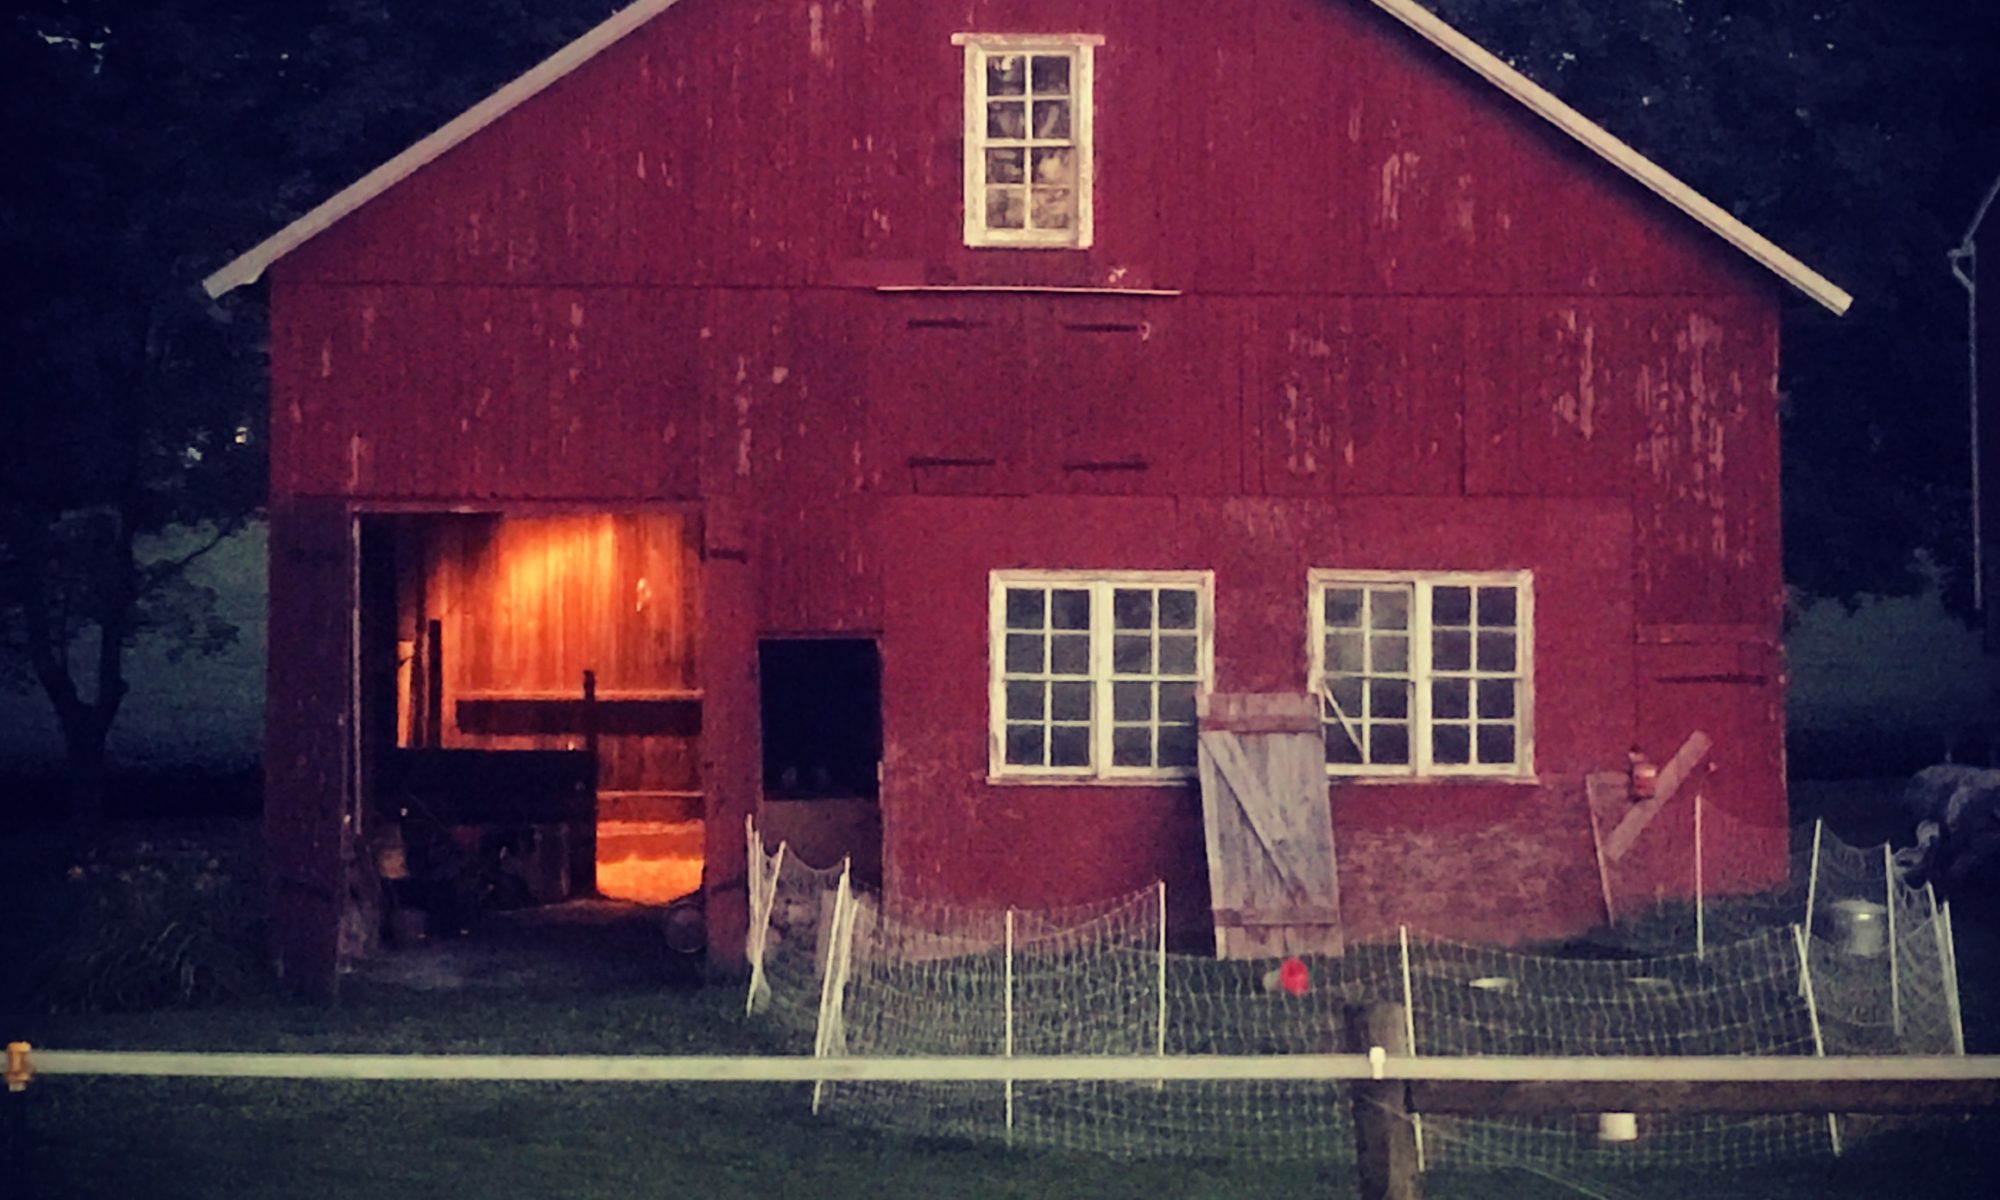 Old PA barn with lights on inside